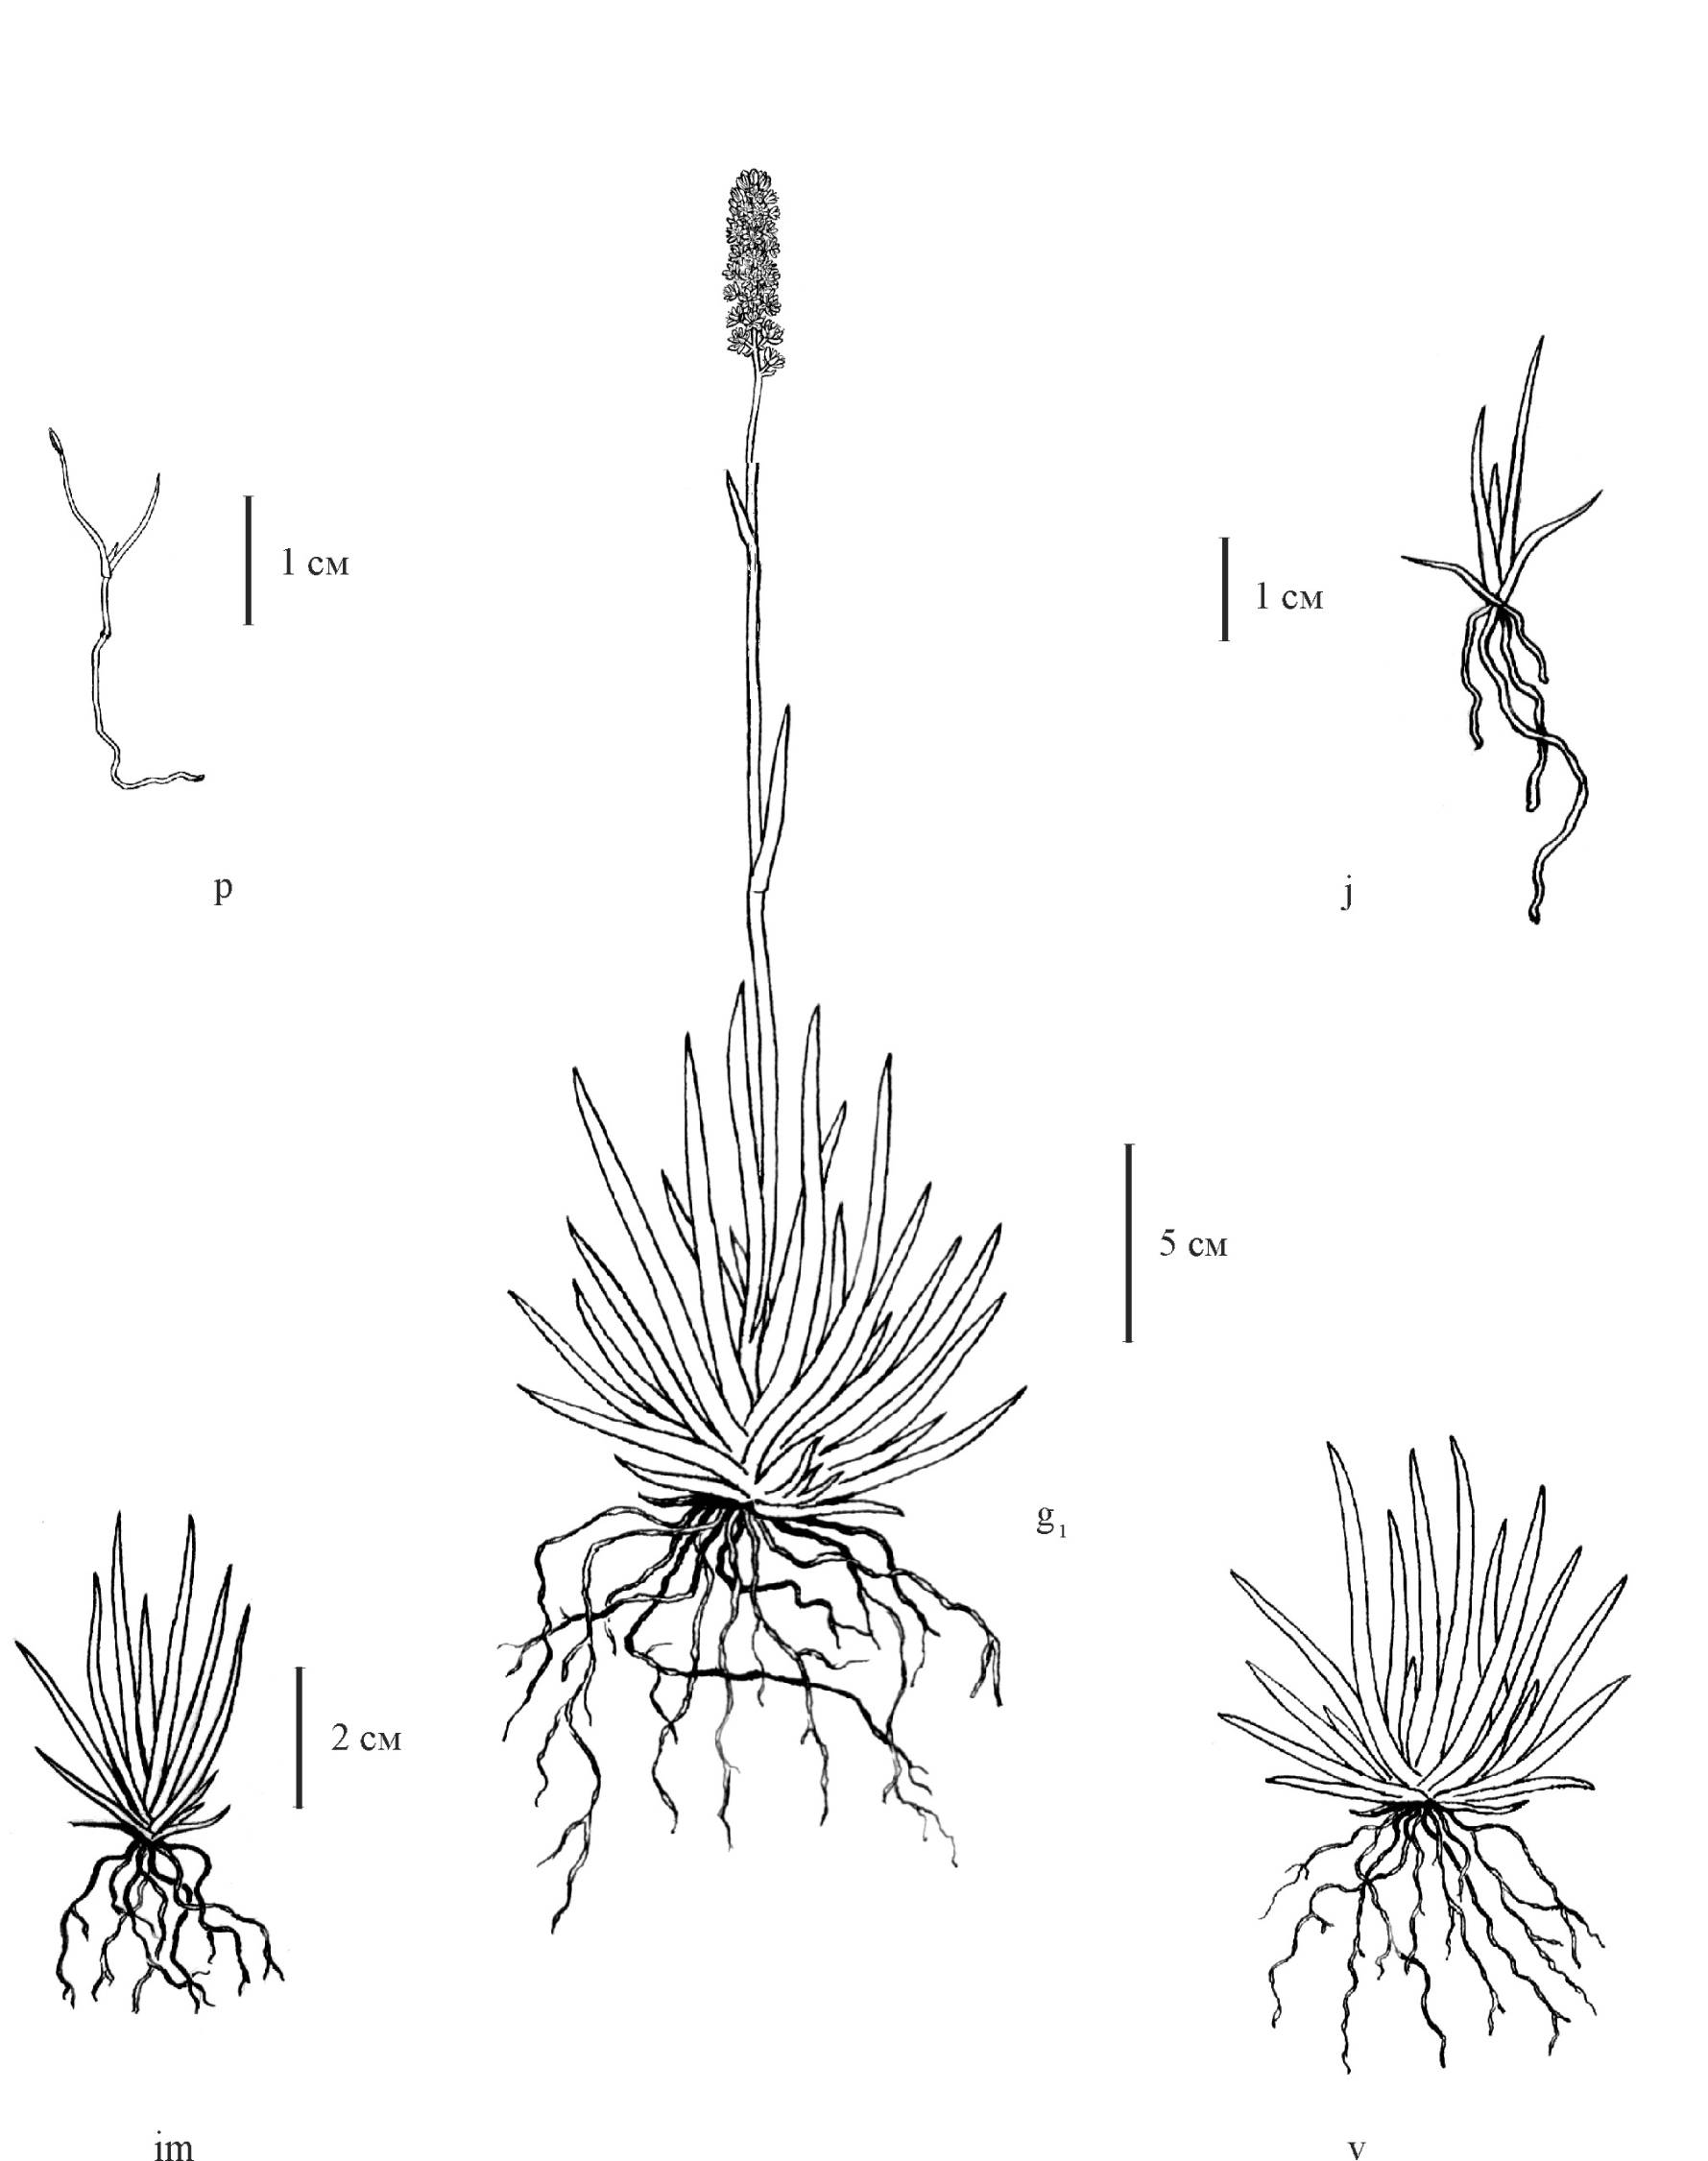 Fig. 1. The age stages of Tofieldia calyculata: p – plantlet; j – juvenile plant; im – immature plant; v – virginile plant; g1 – young generative plant.